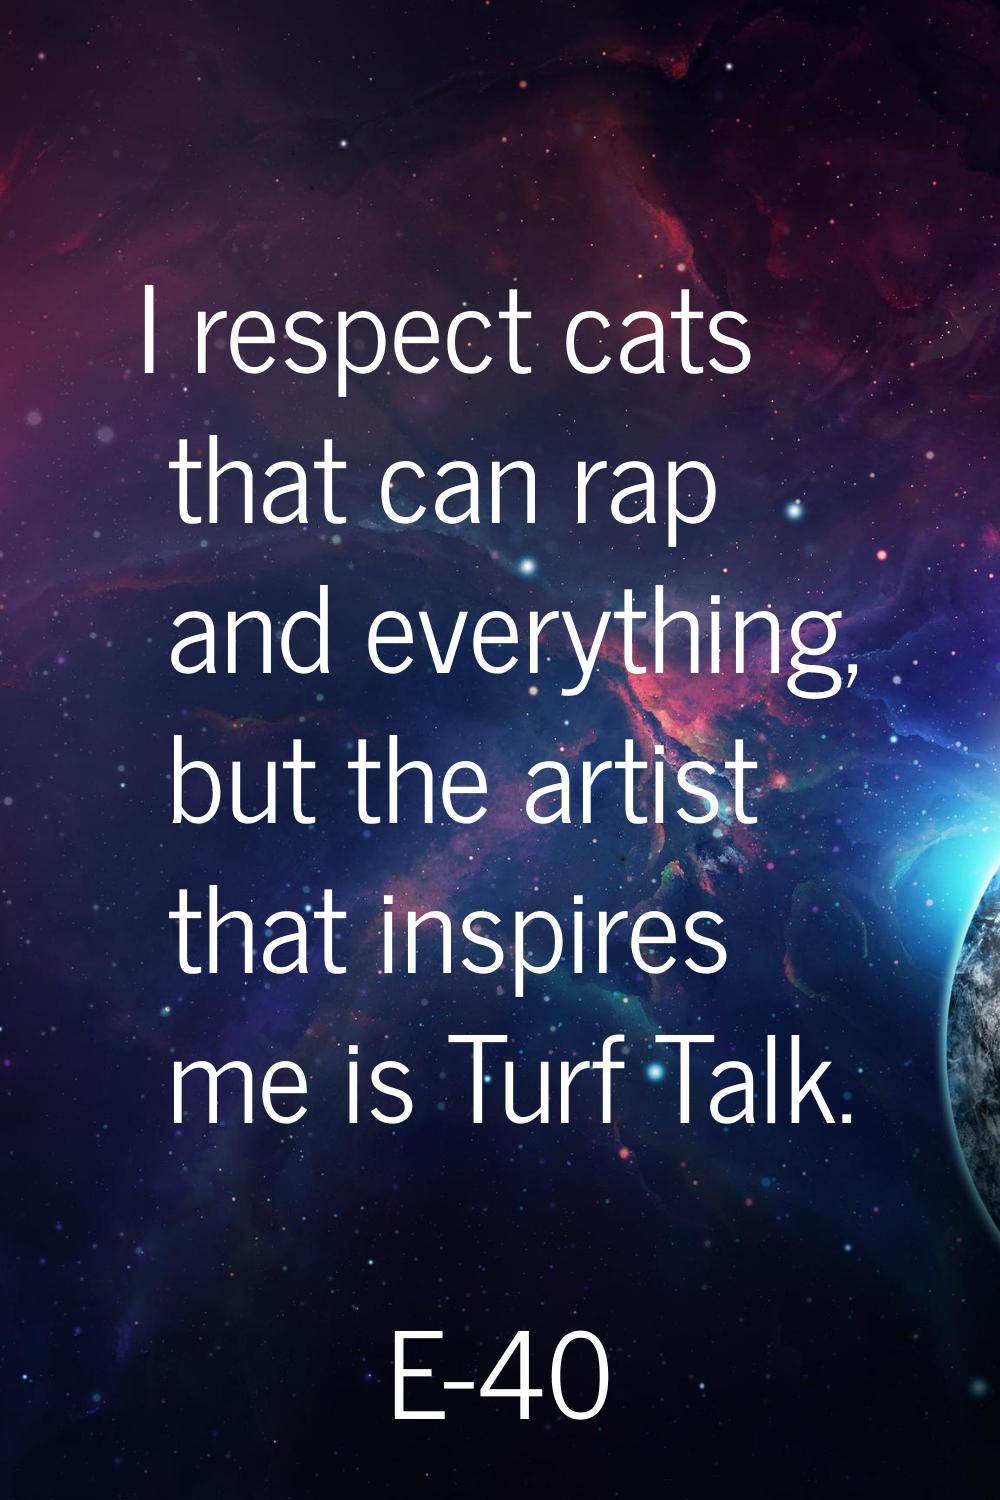 I respect cats that can rap and everything, but the artist that inspires me is Turf Talk.